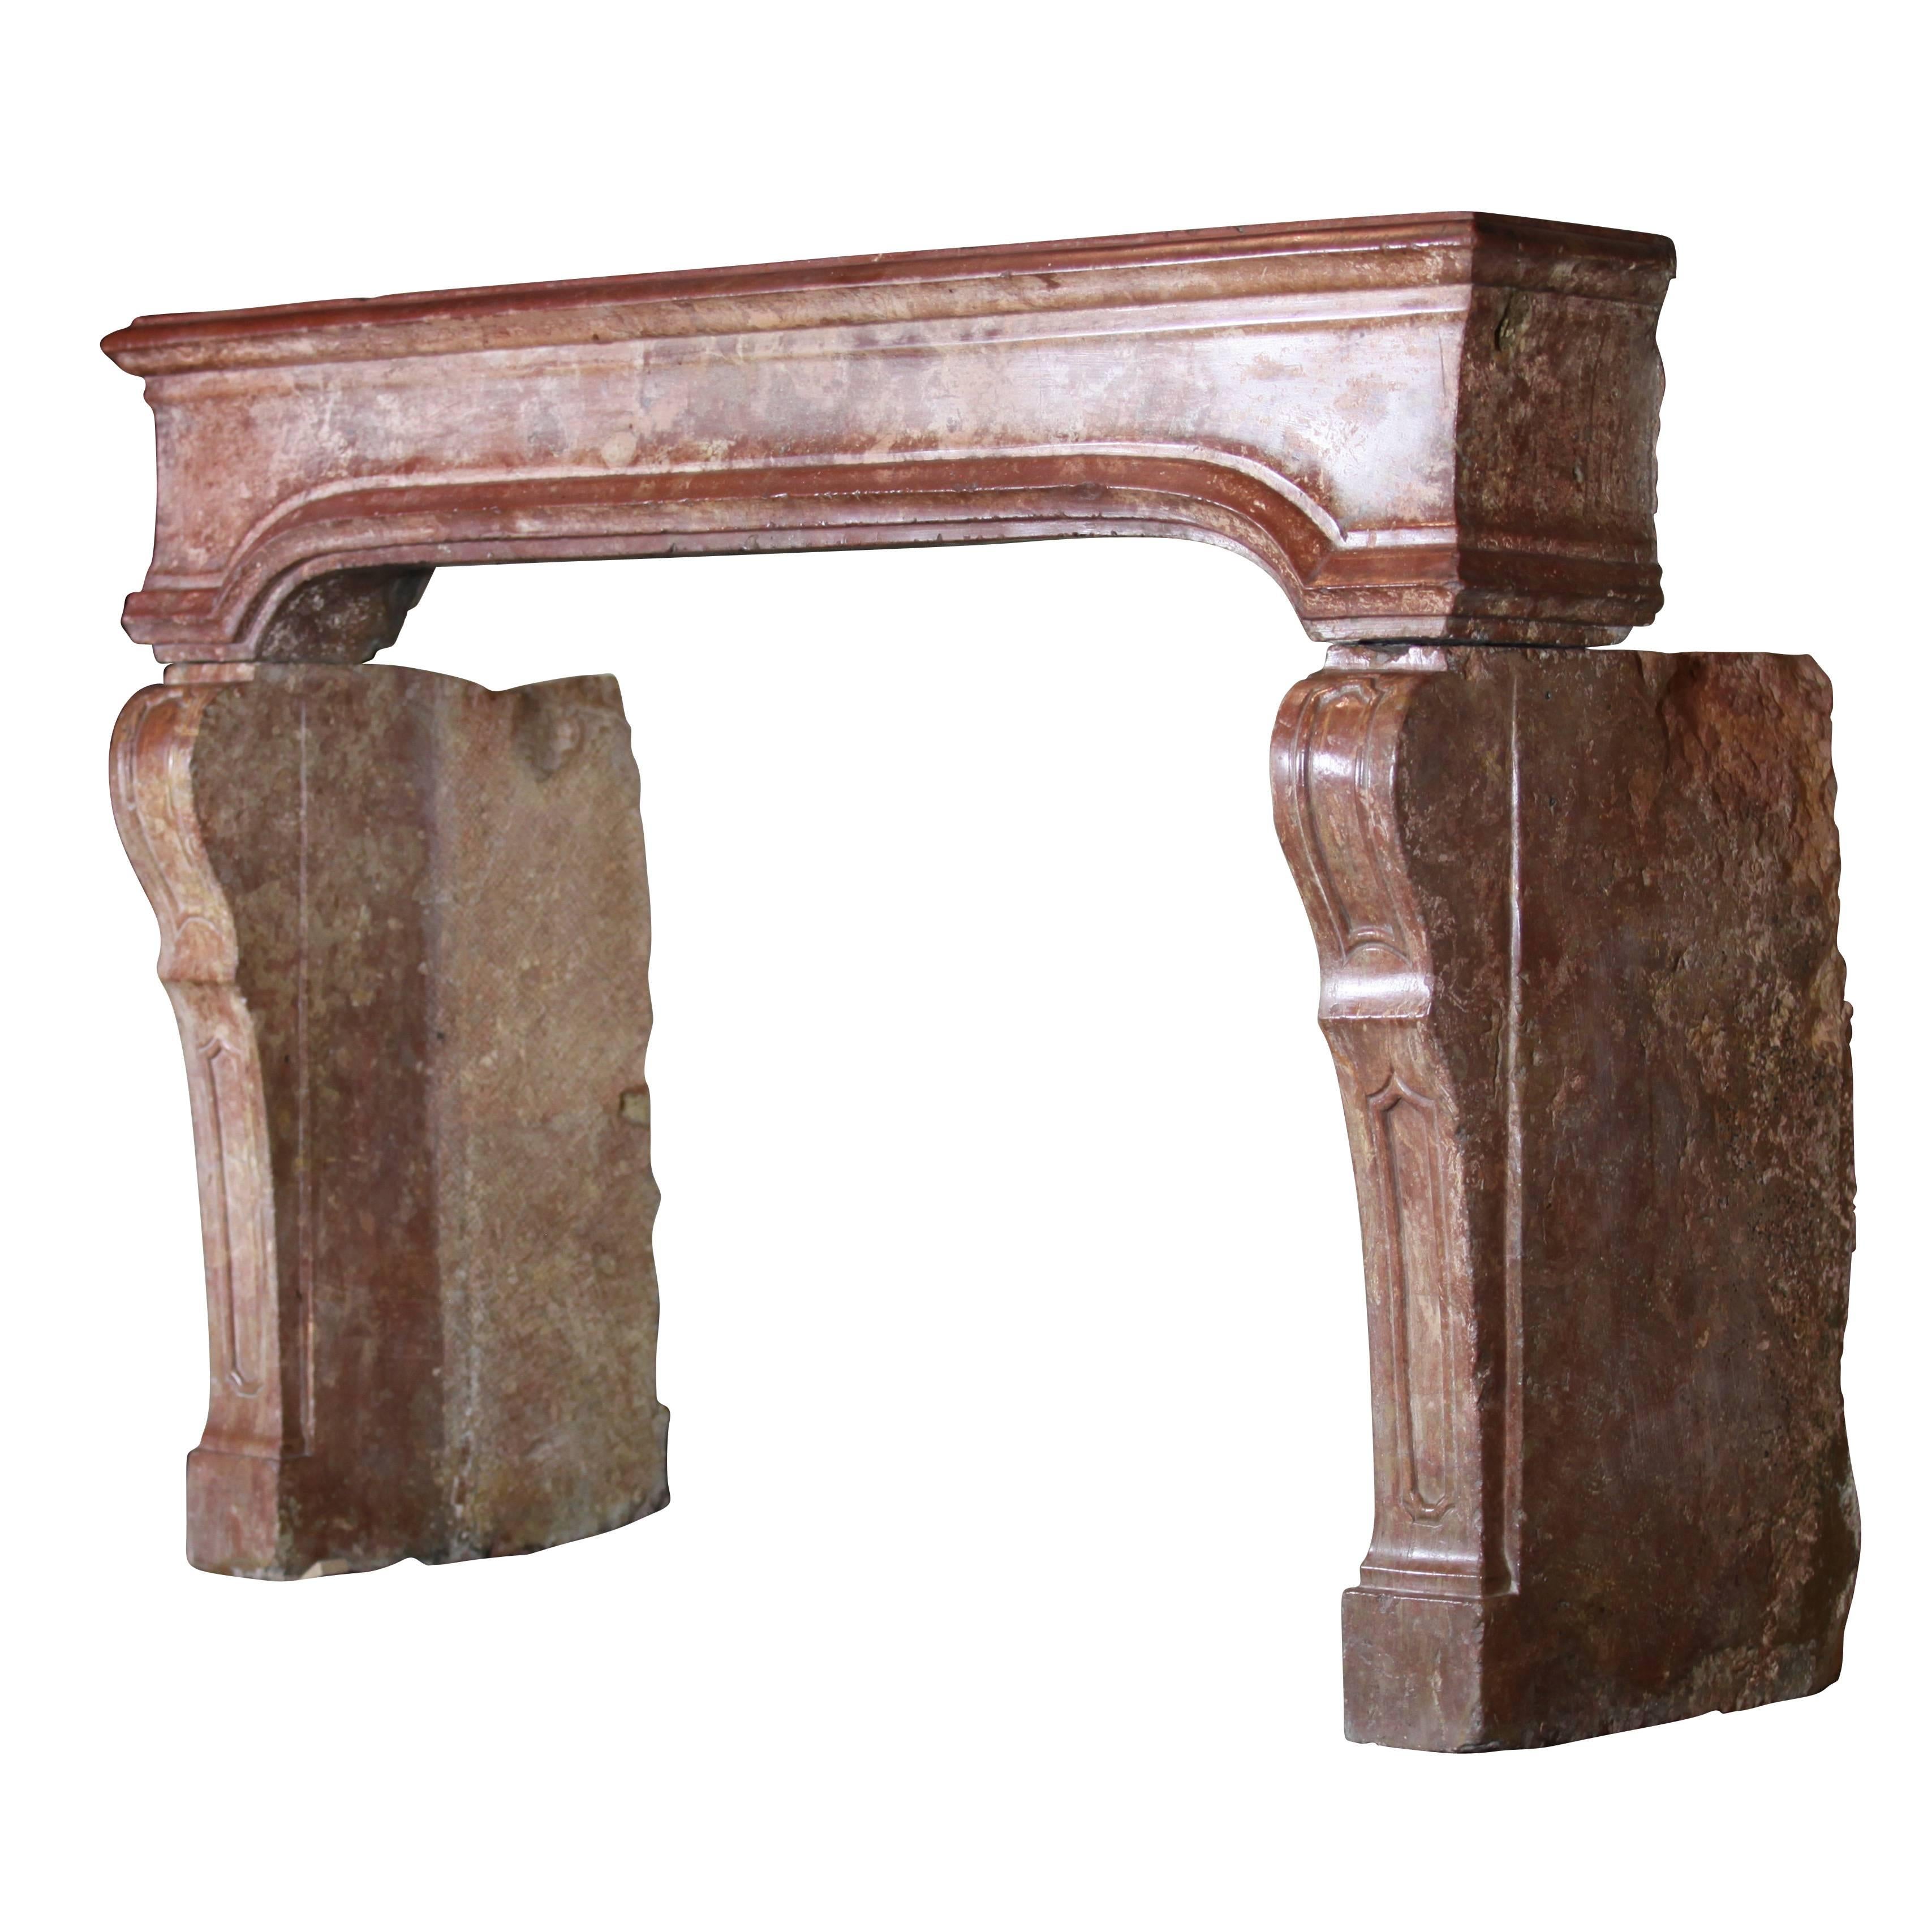 This fireplace surround is a real treasure. It is an Italian chimney piece from the Veneto region in Italy. It has a great patina and perfect proportions. It is a one of a kind. The small proportions of this piece and the deep color of it makes it